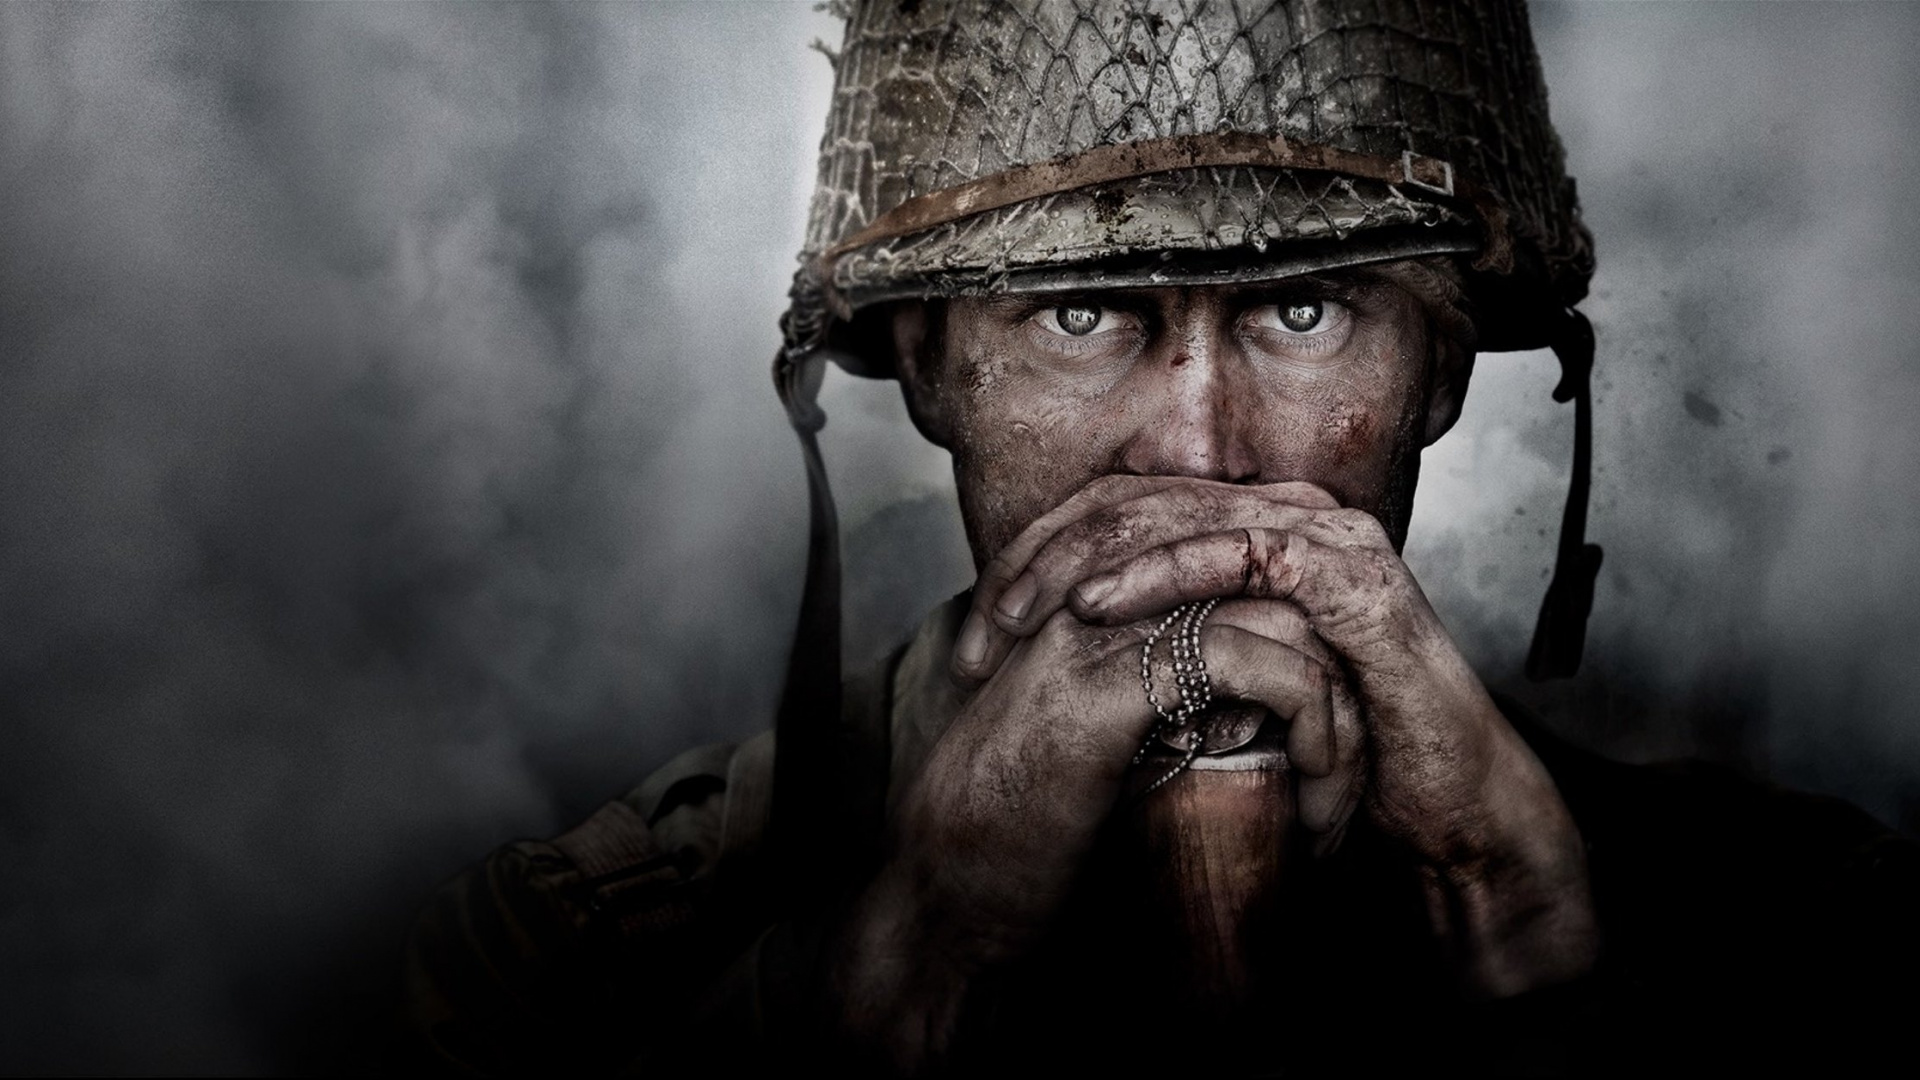 Call of Duty WWII, Activision, Facial Hair, Beard, Human. Wallpaper in 1920x1080 Resolution